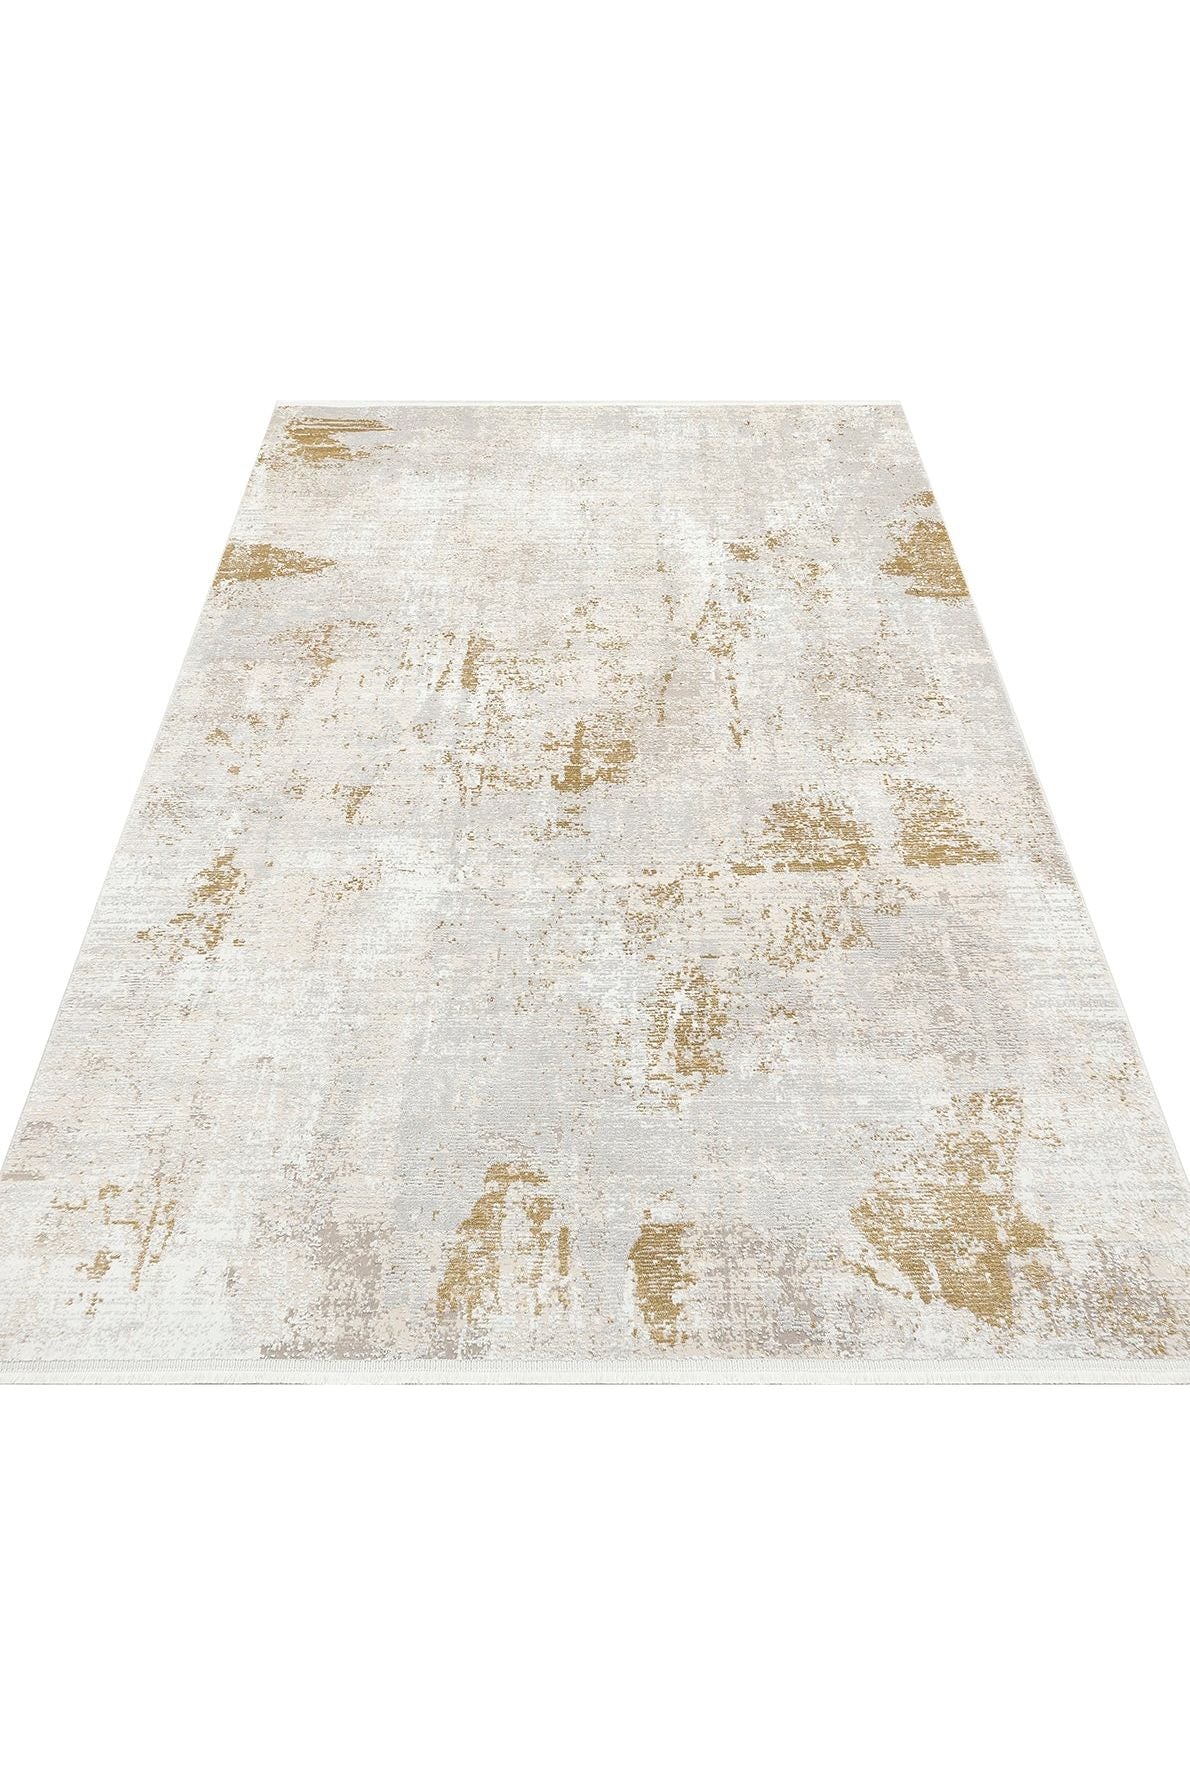 #Turkish_Carpets_Rugs# #Modern_Carpets# #Abrash_Carpets#Elegant Rugs With Acrylic And PolyesterZrh 06 Cream Yellow